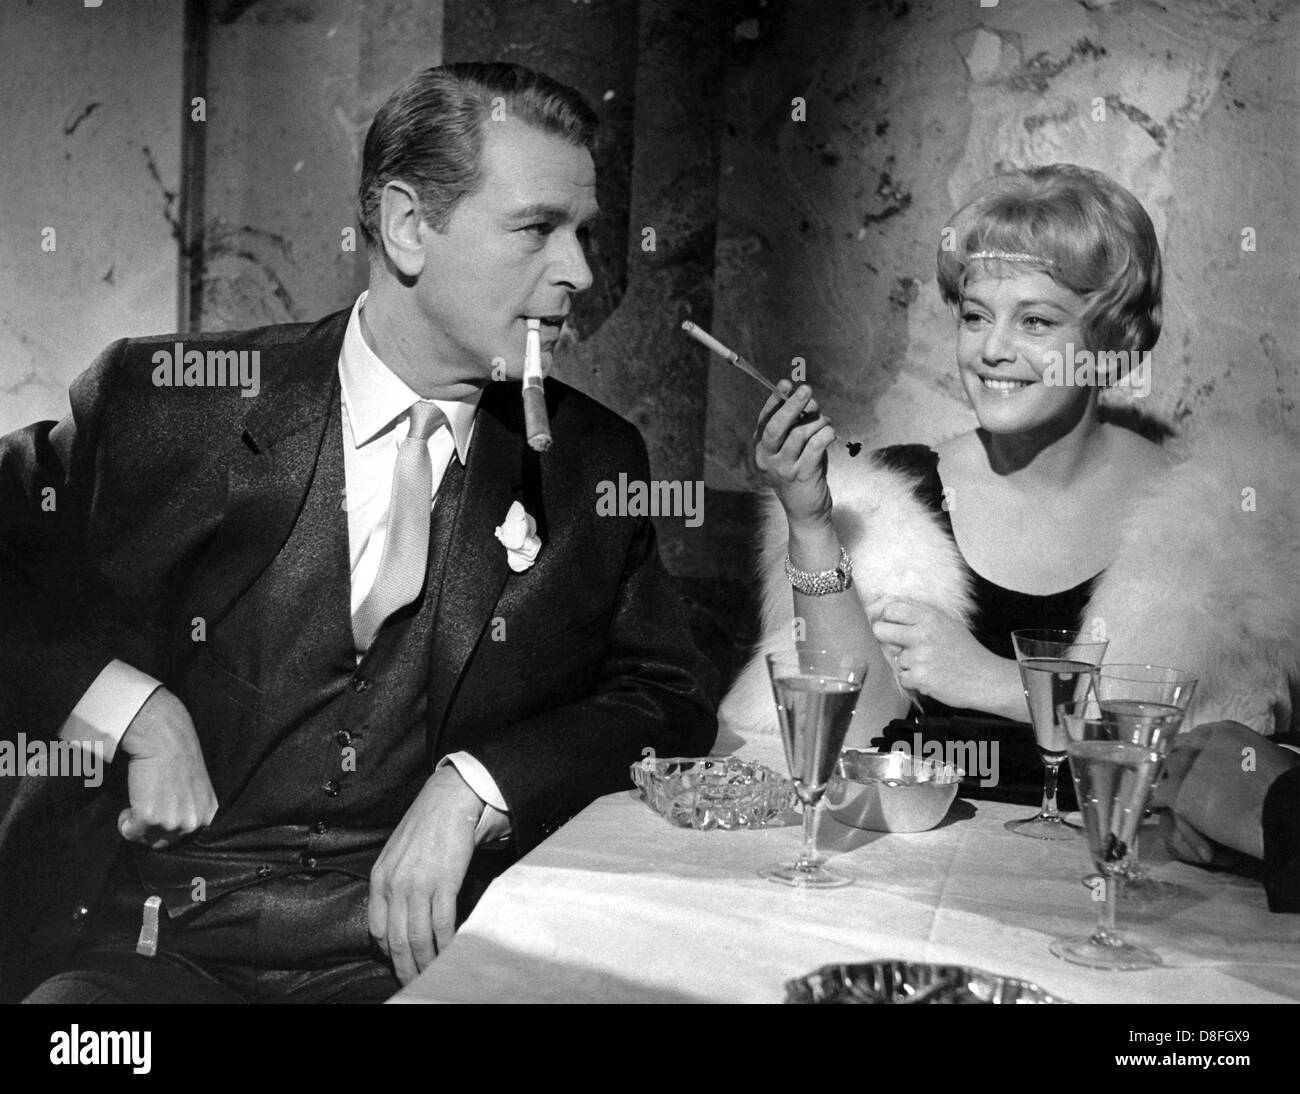 Austrian actor O. W. Fischer and Maria Schell during the screening of  'Das Riesenrad' on the 13th of February in 1961. Stock Photo